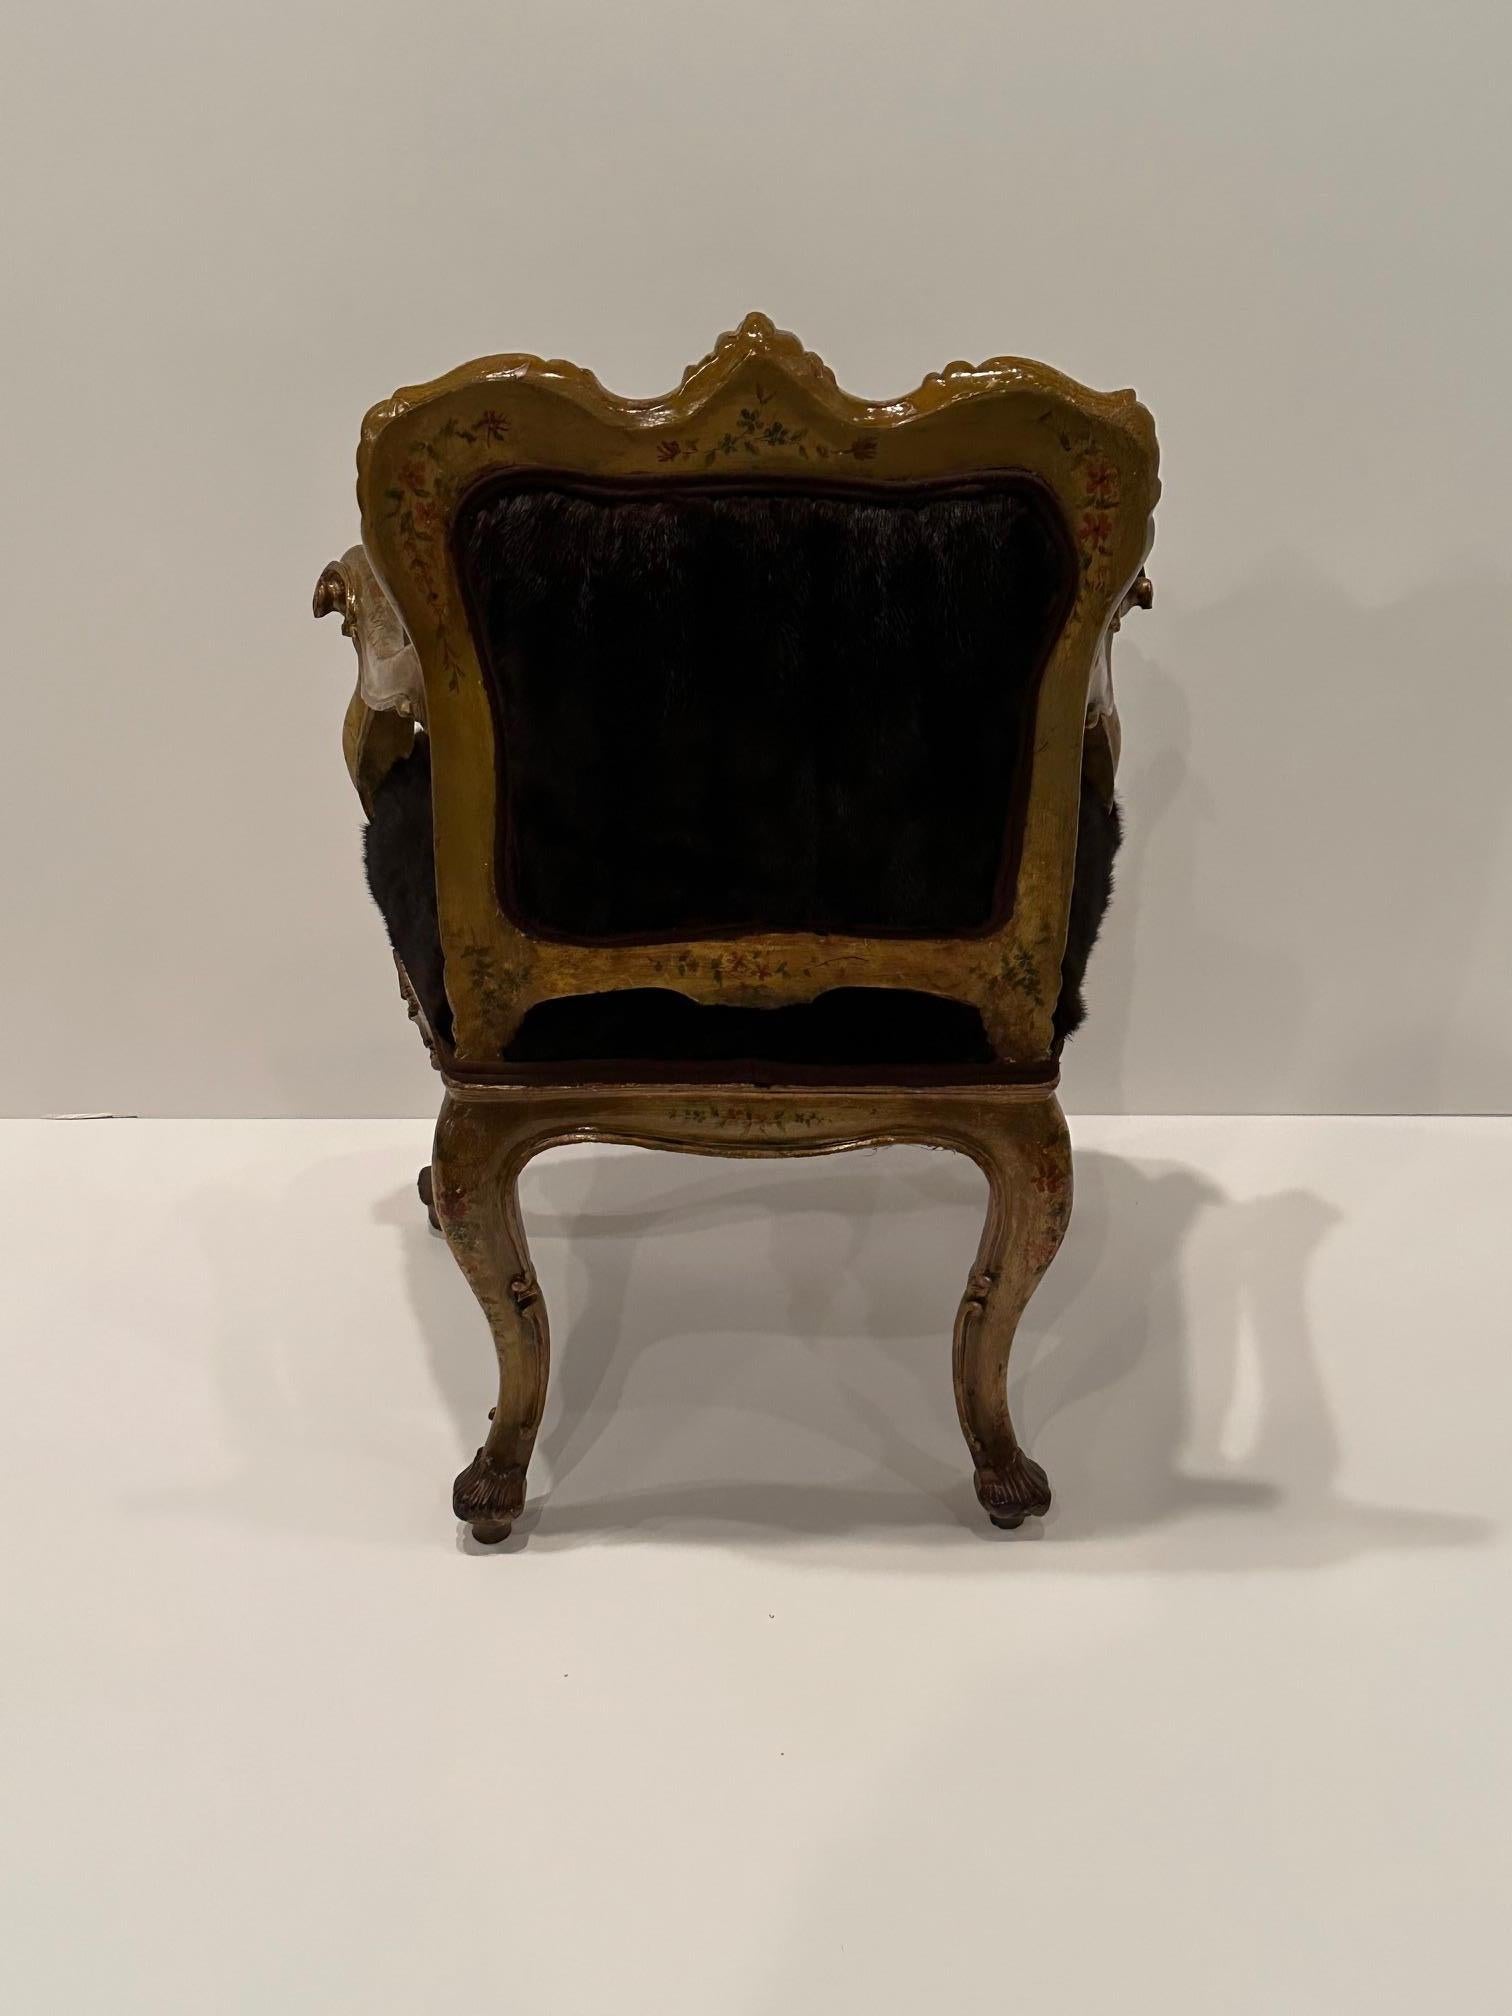 Sinfully Rich Ornate Italian Painted Venetian Armchair Upholstered in Mink Fur For Sale 4